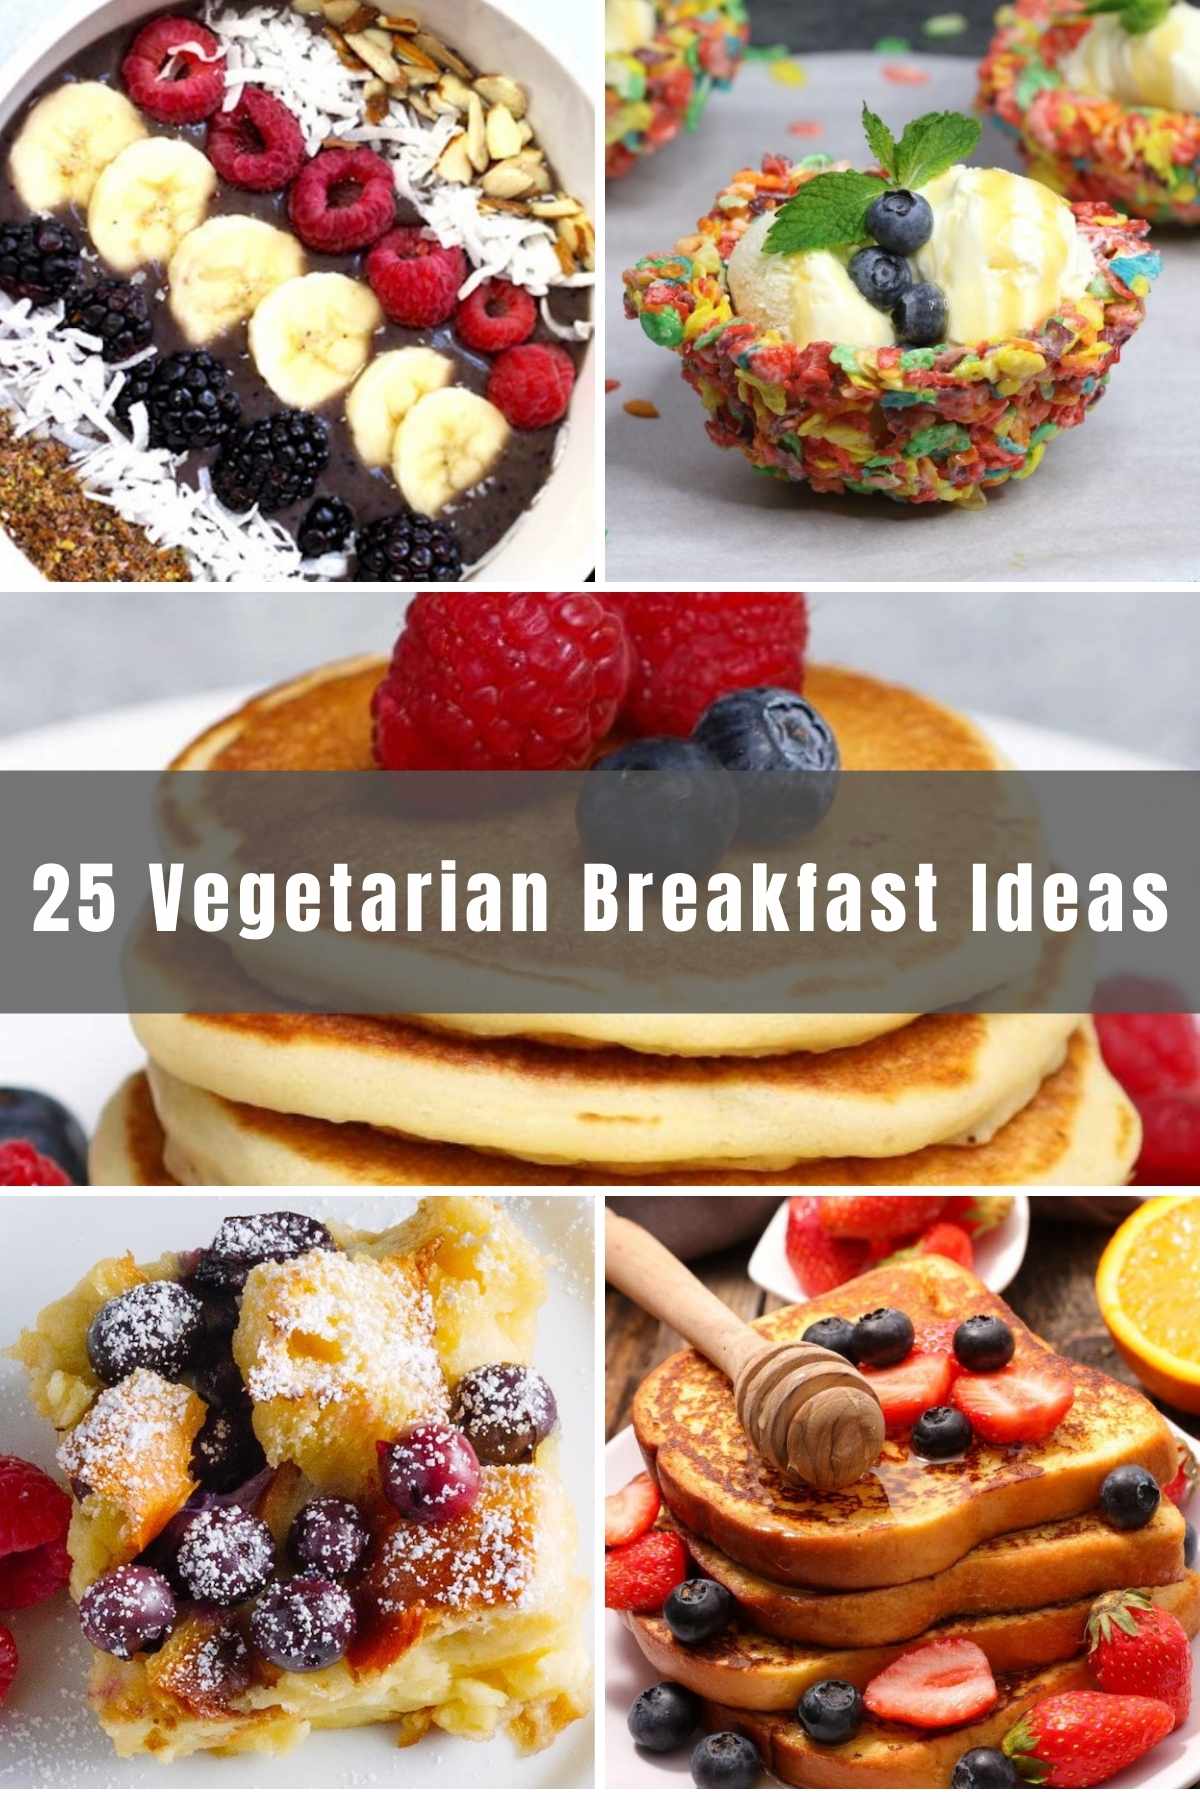 We’ve collected 25 of the Best Vegetarian Breakfast Ideas that will start your morning off right. From healthy and savory egg muffins to sweet French toast casserole and everything in between, there are many options your entire family will love!